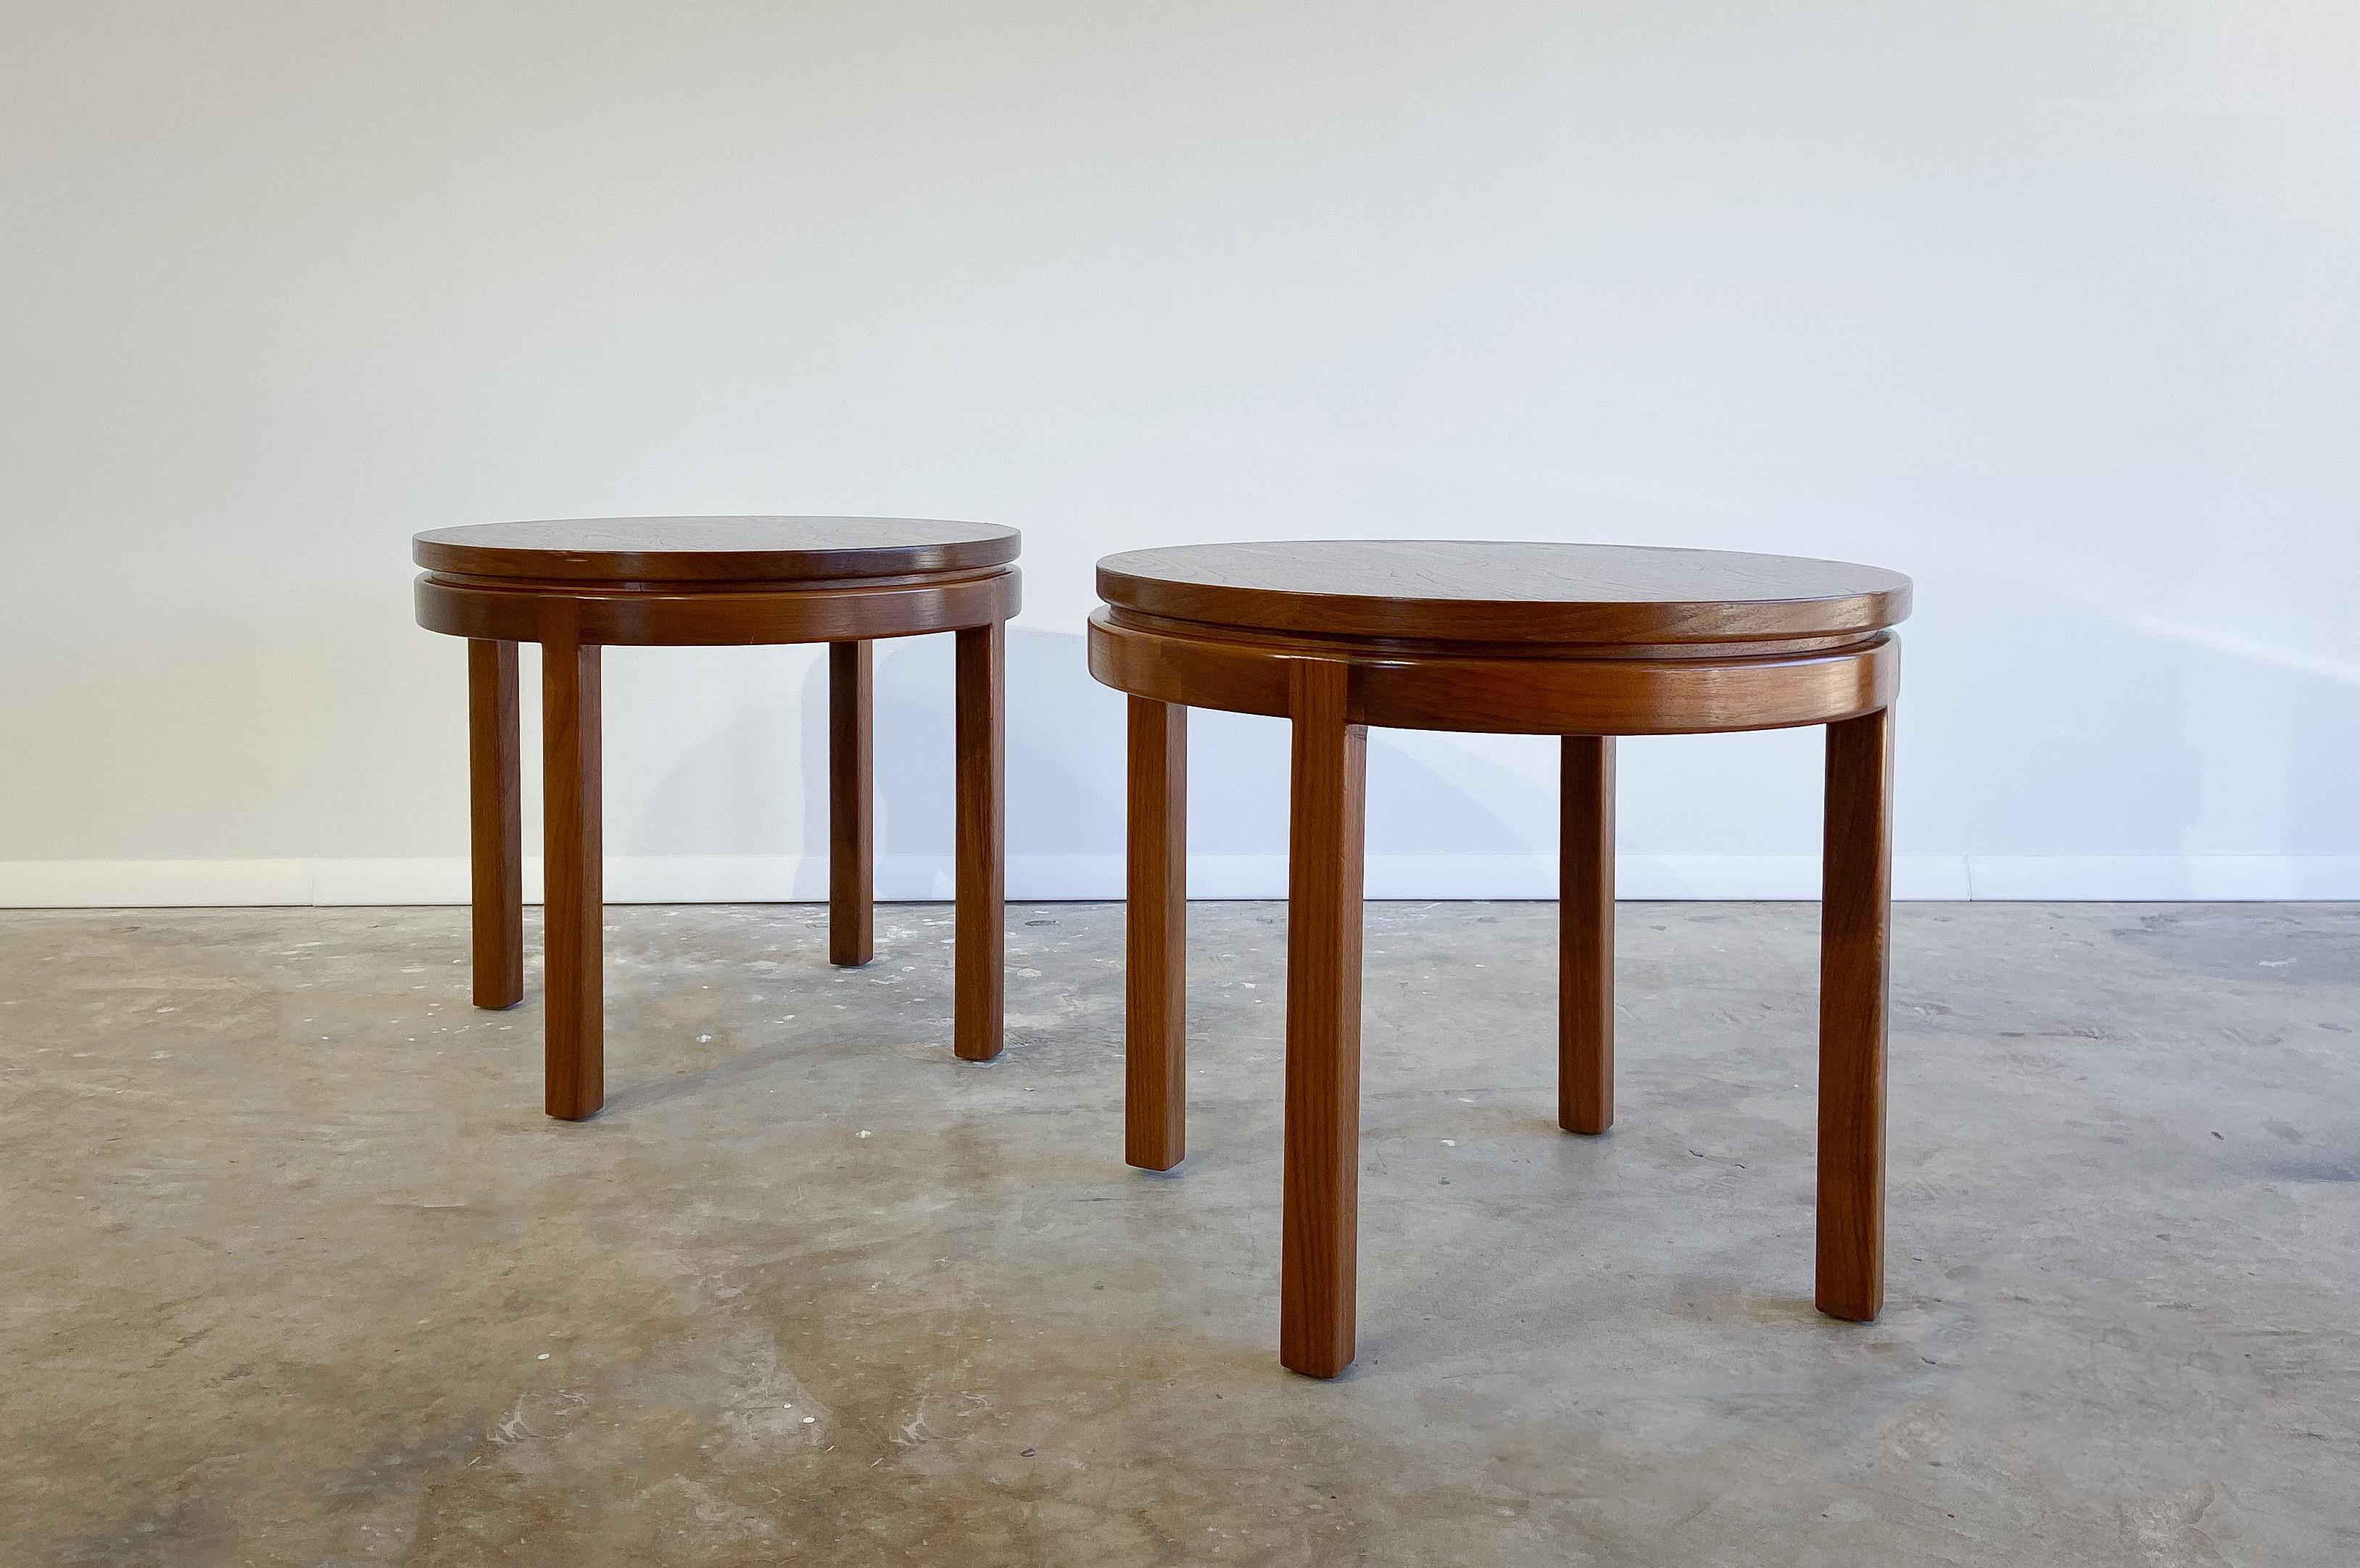 Mid-Century Modern Walnut Side or End Tables in the manner of Edward Wormley for Dunbar, 1960's For Sale